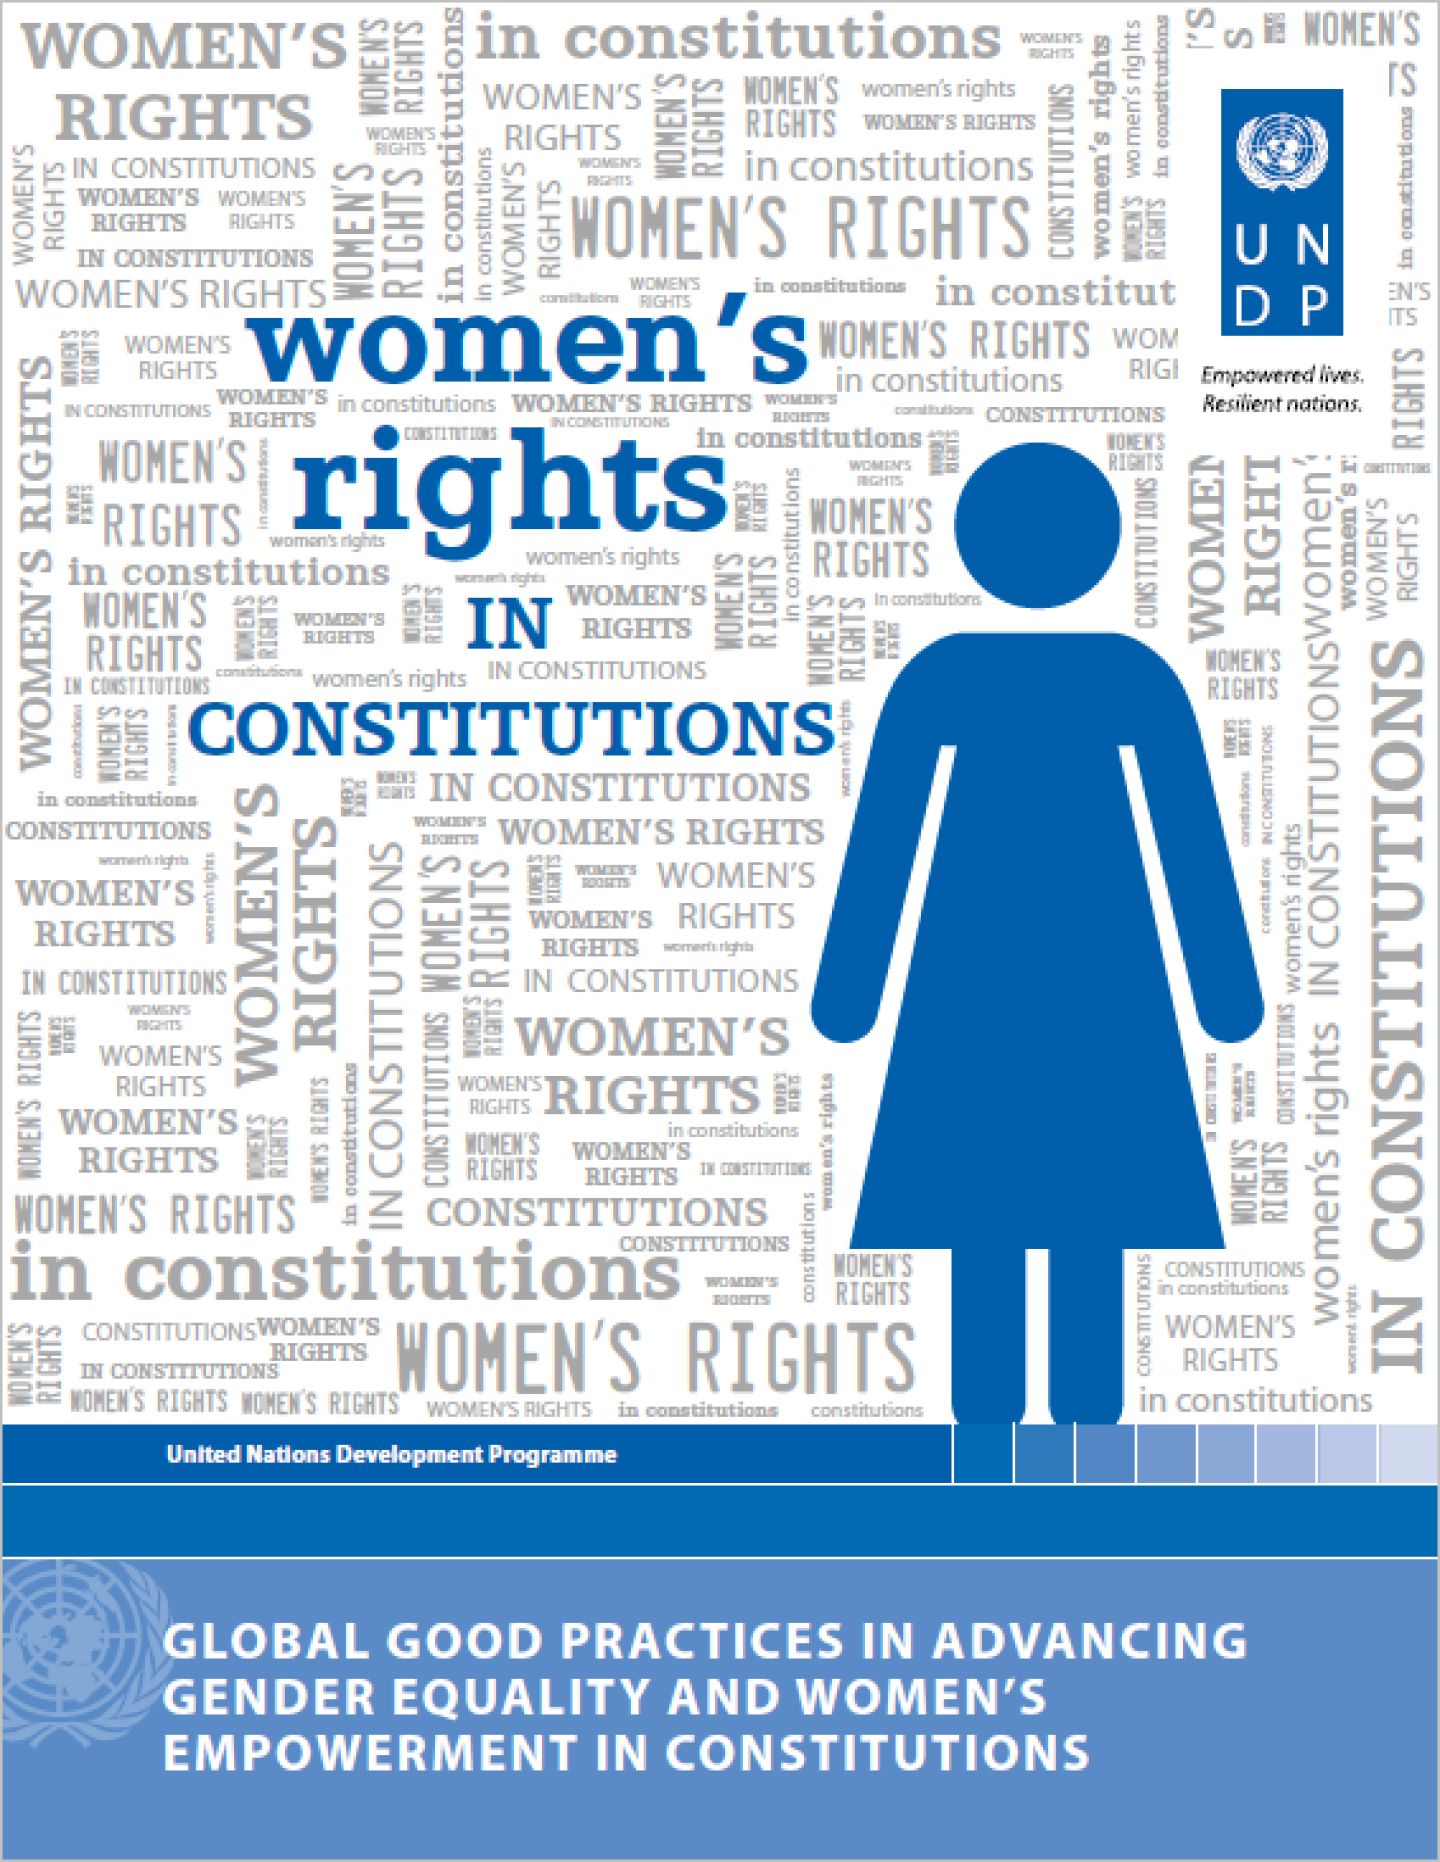 Global Good Practices in Advancing Gender Equality and Women's Empowerment  in Constitutions